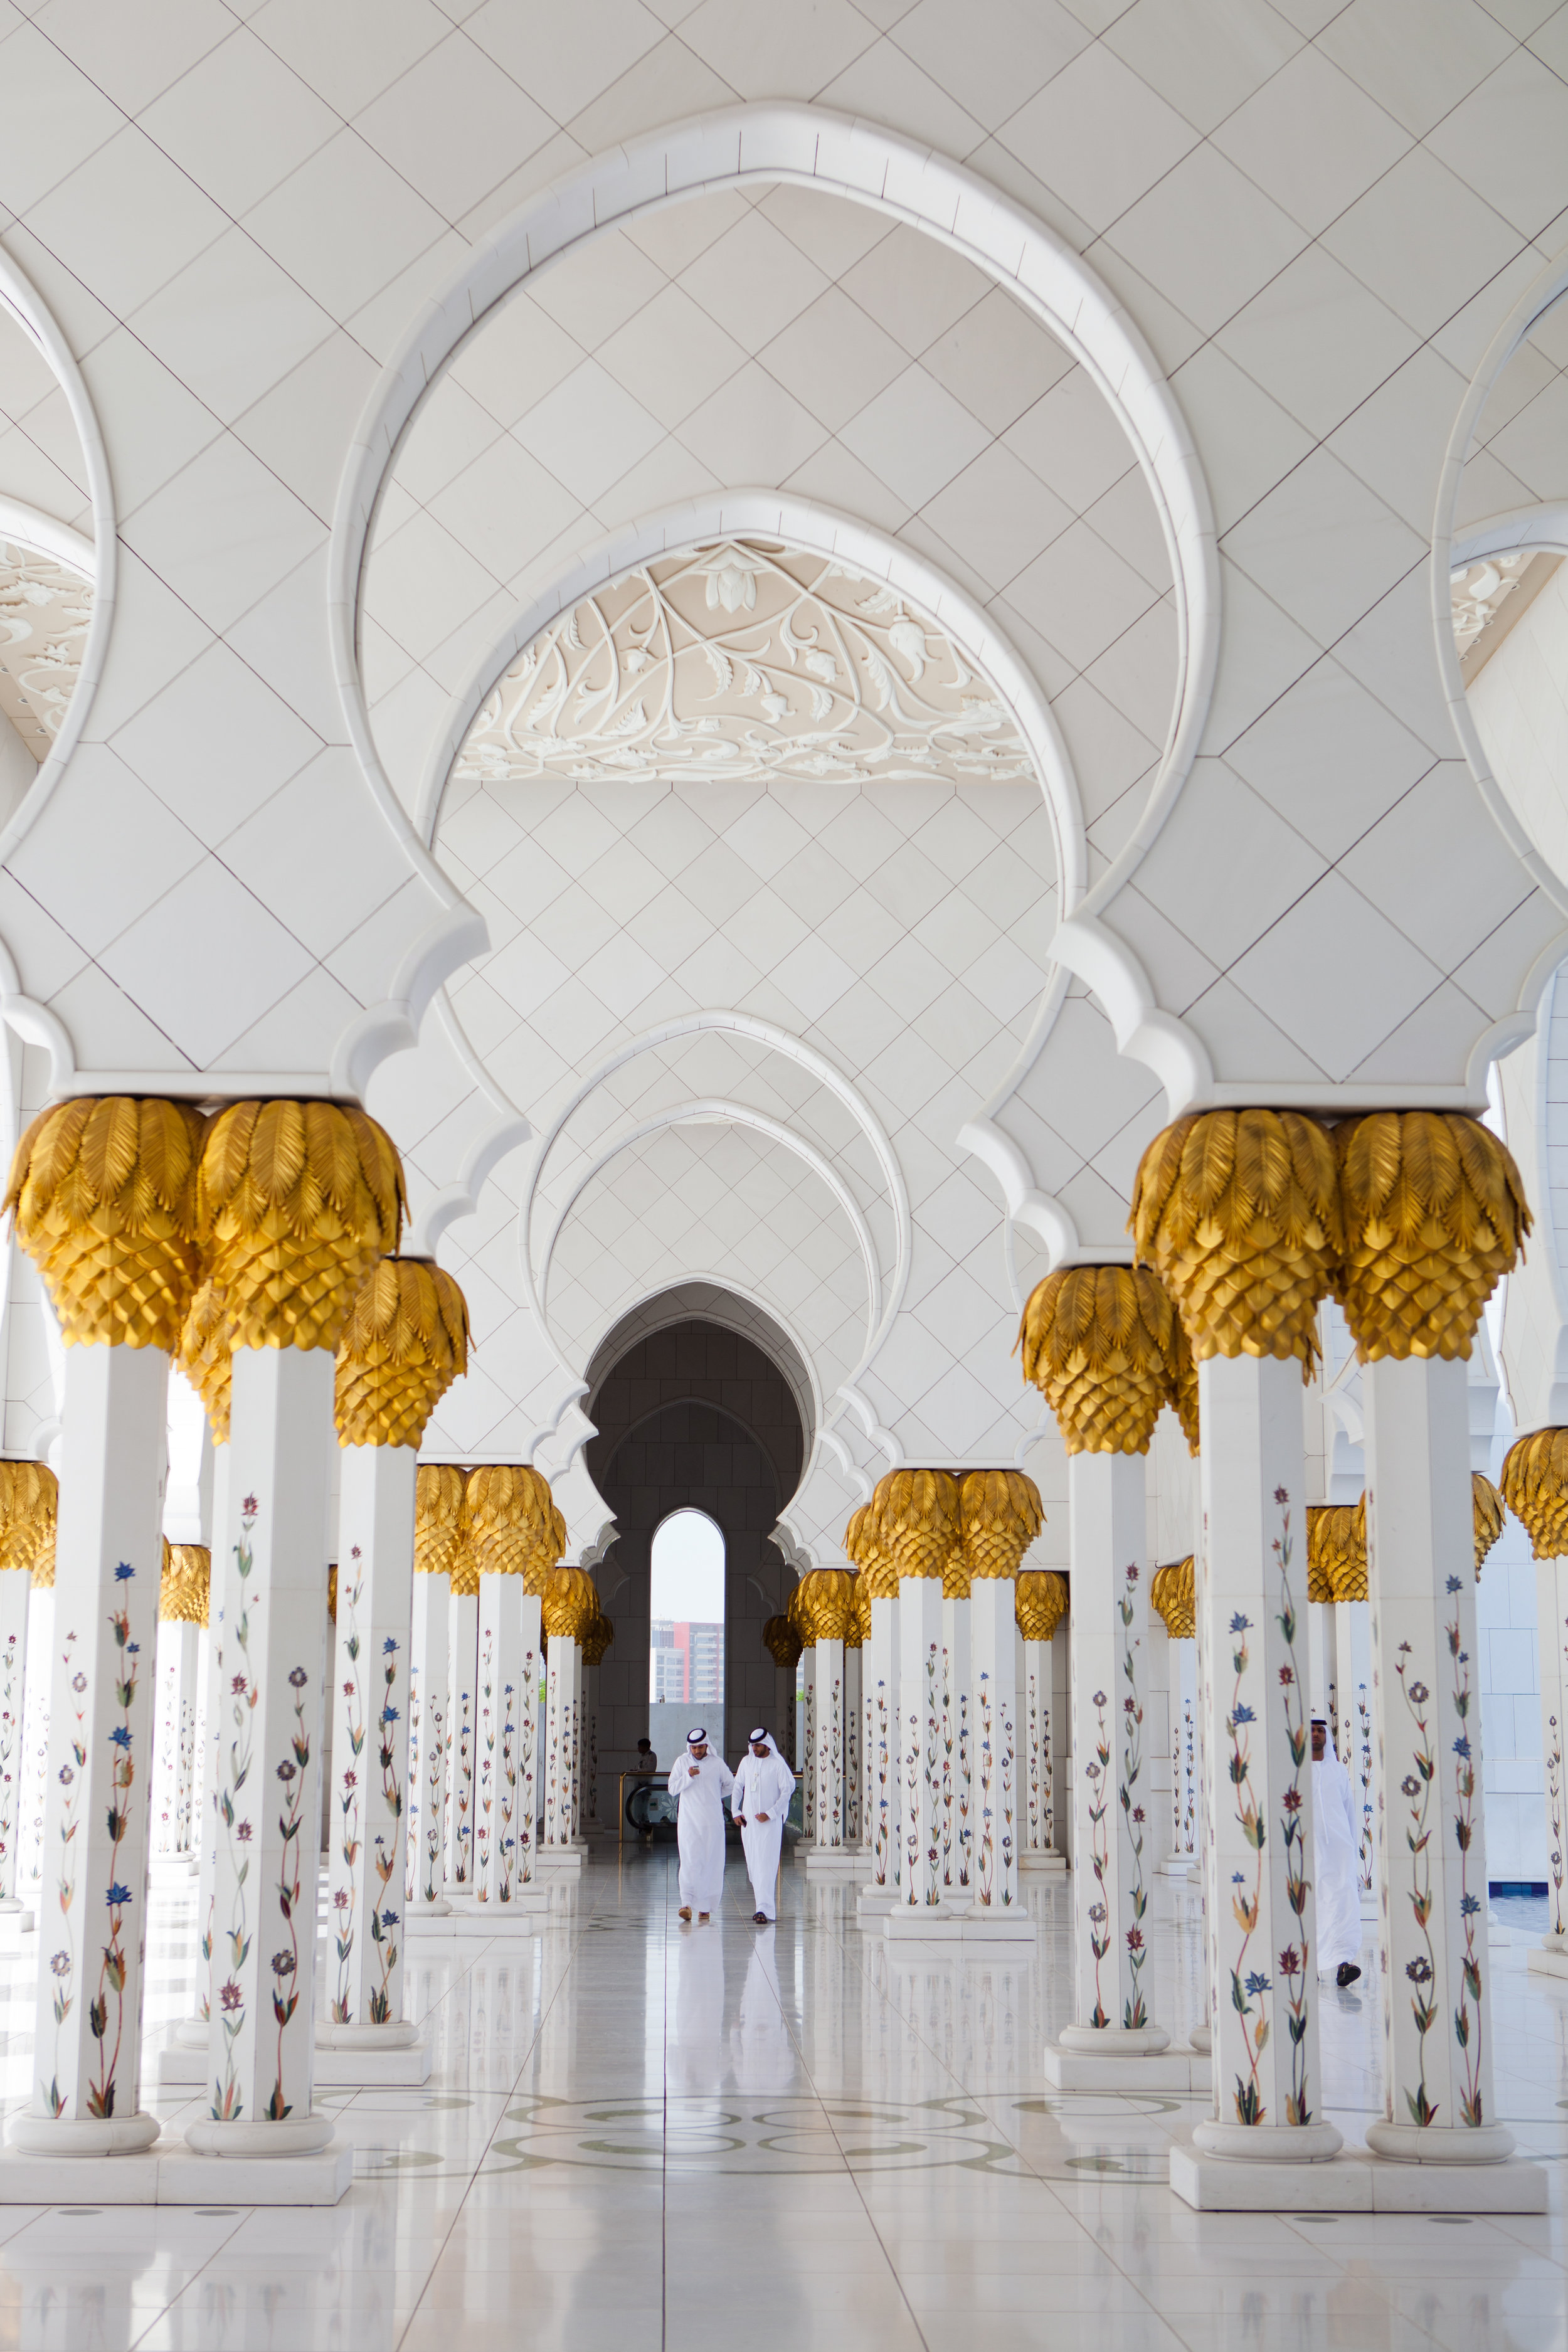 Had I not looked behind me while shooting the main portion of the Sheikh Zayed Grand Mosque in Abu Dhabi, I would have missed this moment between two local men.